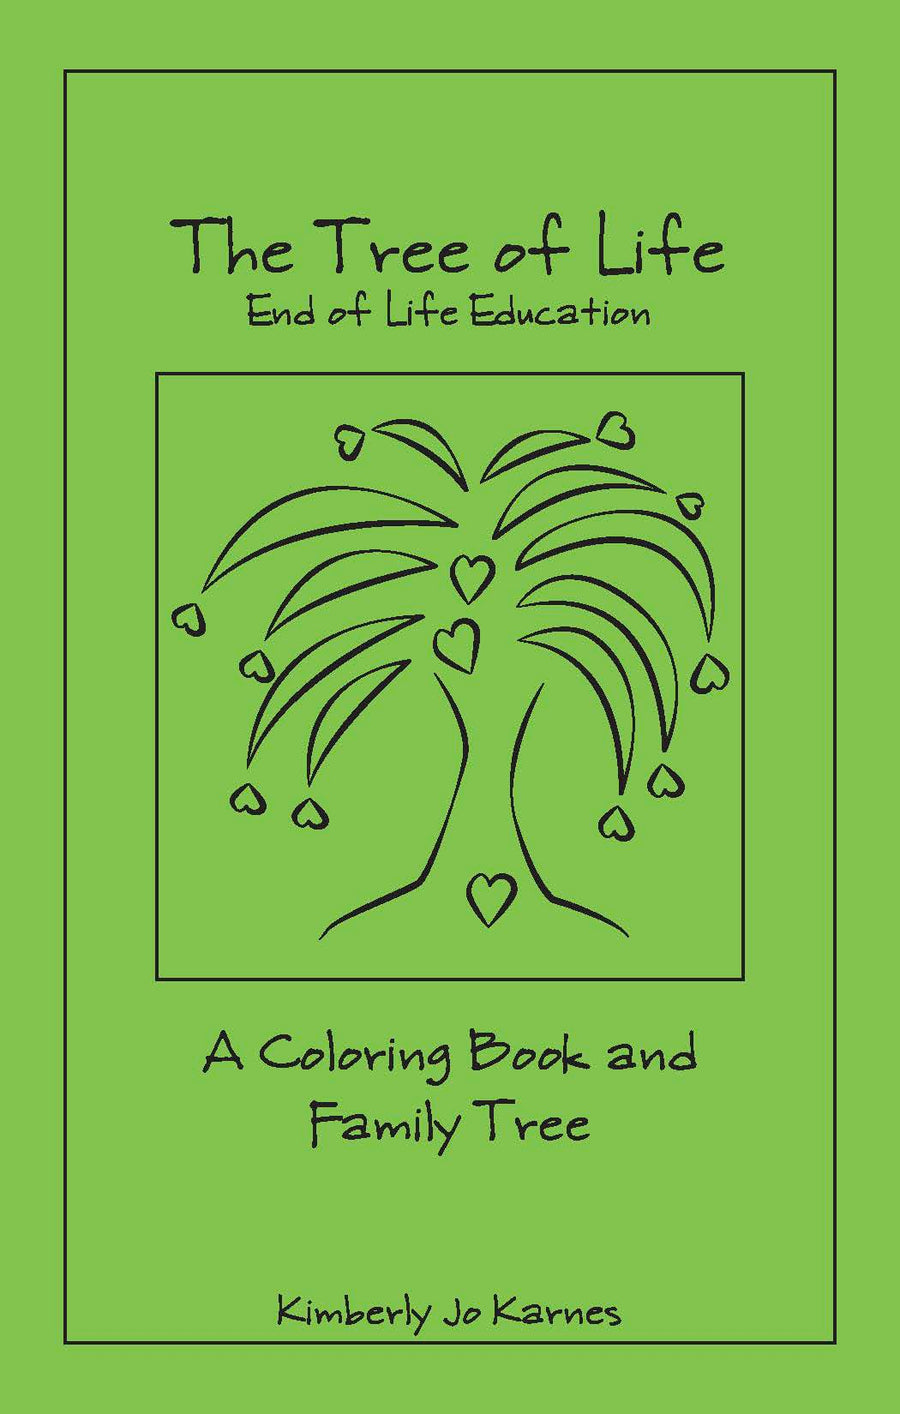 The Tree of Life: End of Life Education, A Coloring Booklet and Family Tree